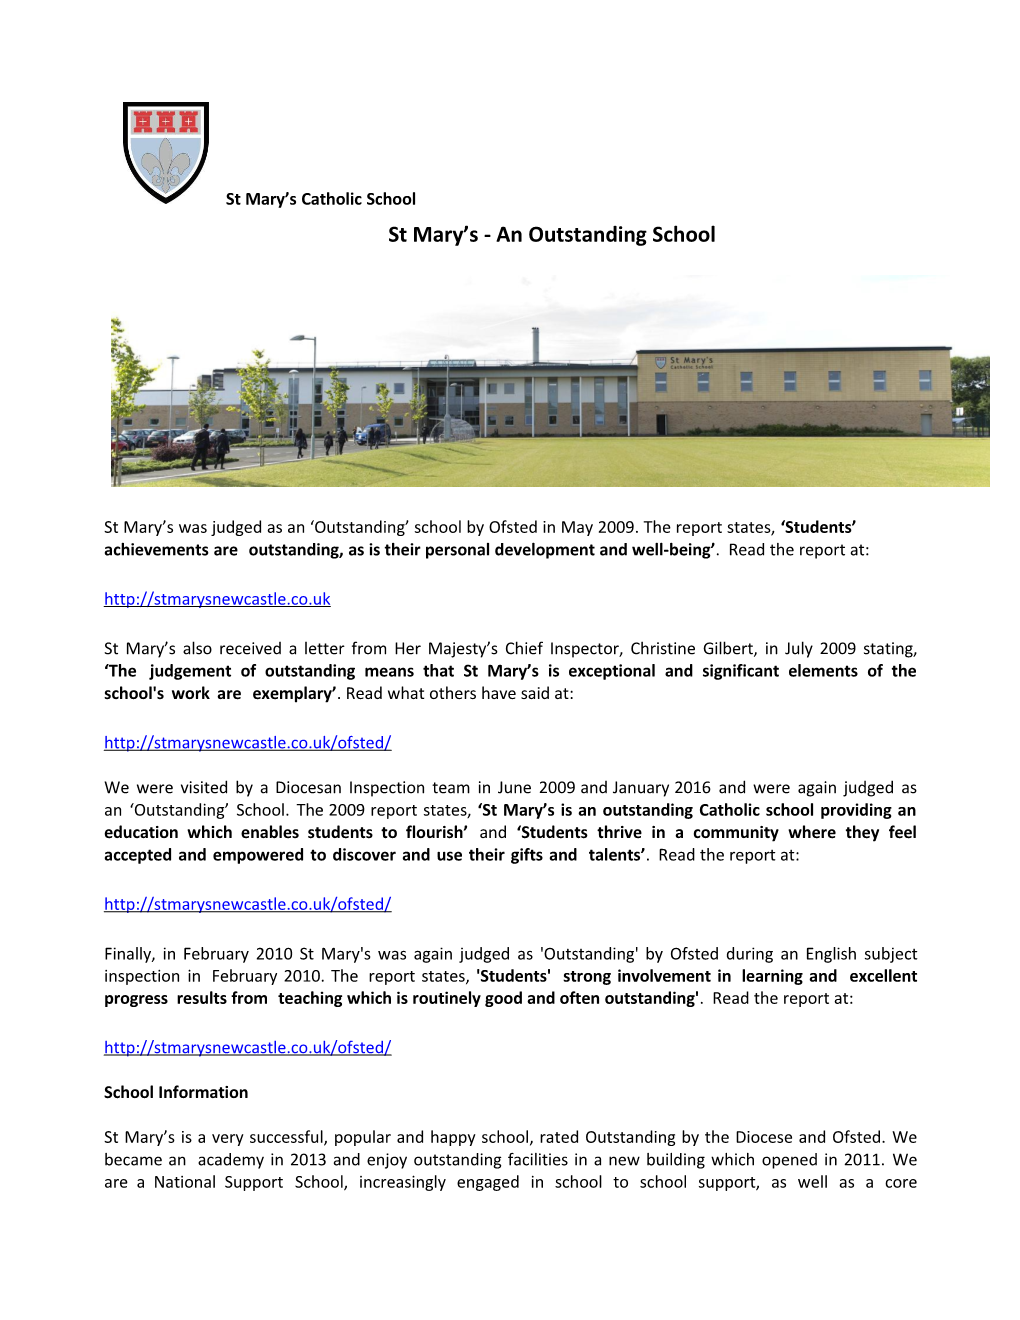 St Mary S- an Outstanding School